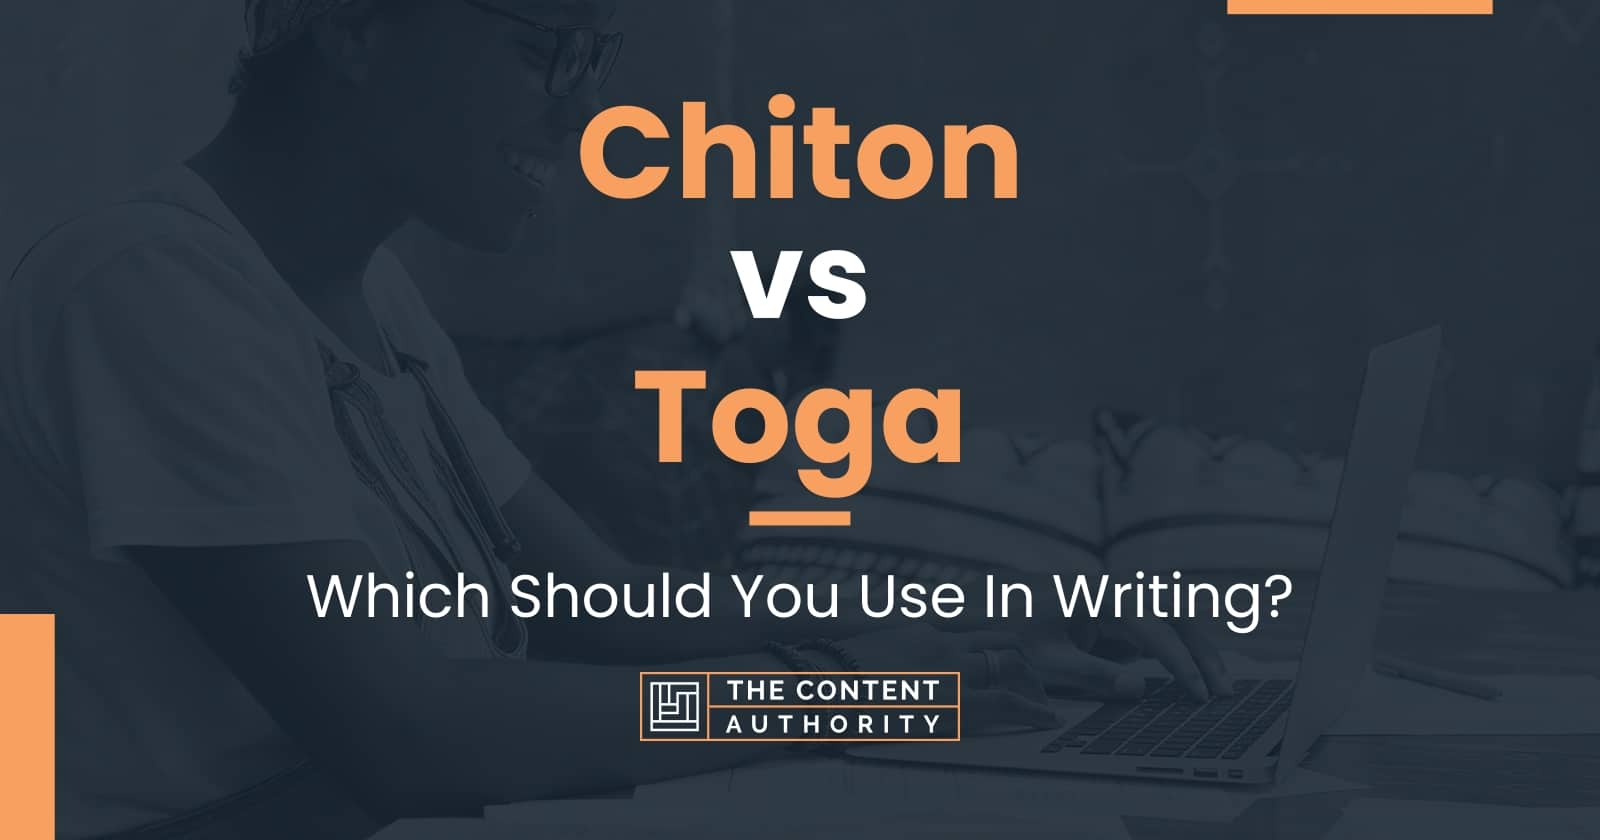 Chiton vs Toga: Which Should You Use In Writing?